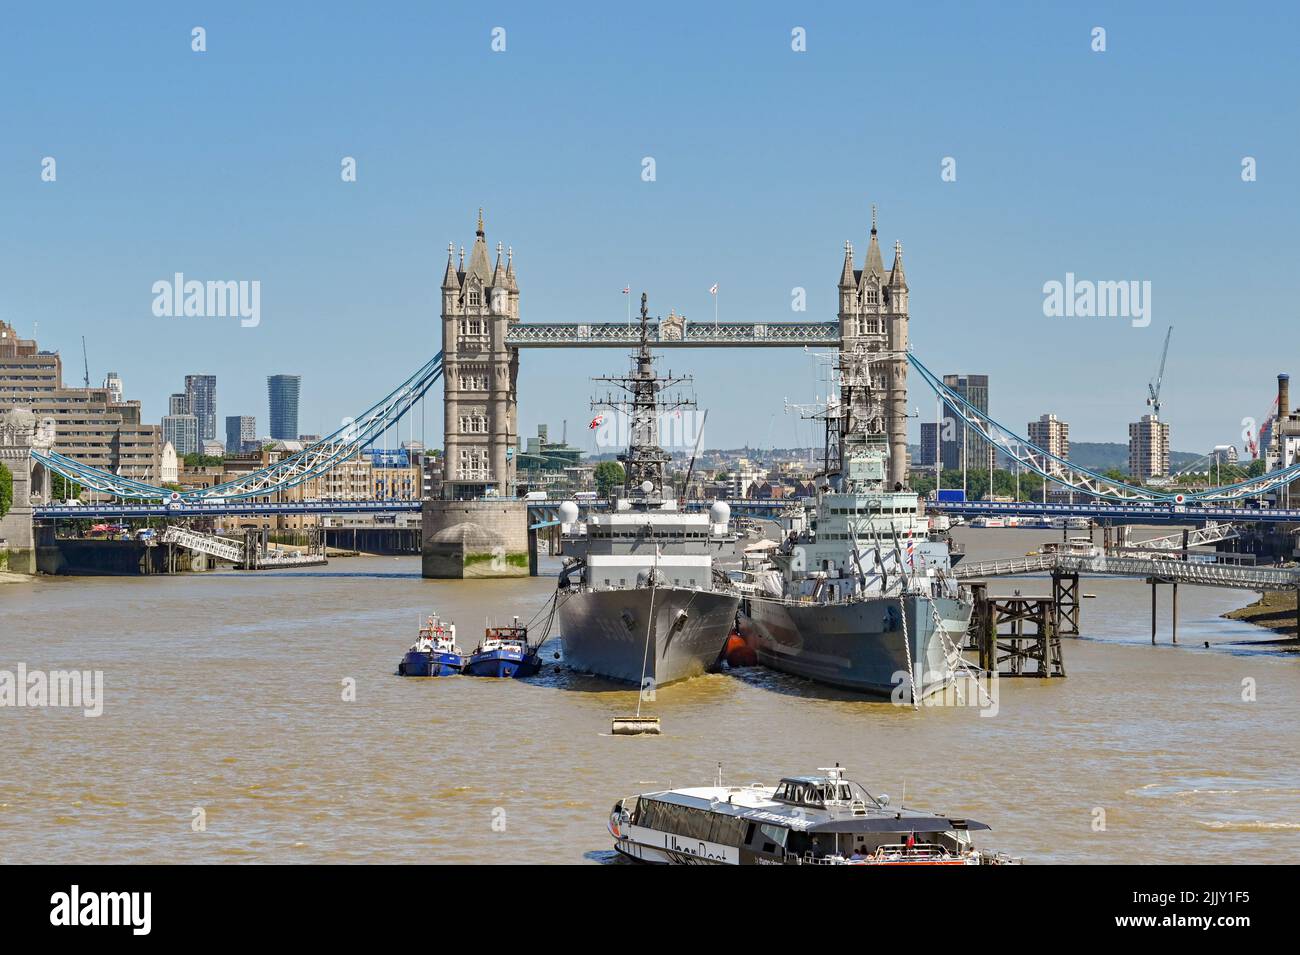 London, England - June 2022: HMS Belfast and a modern Royal Navy warship moored on the River Thames. In the background is Tower Bridge. Stock Photo